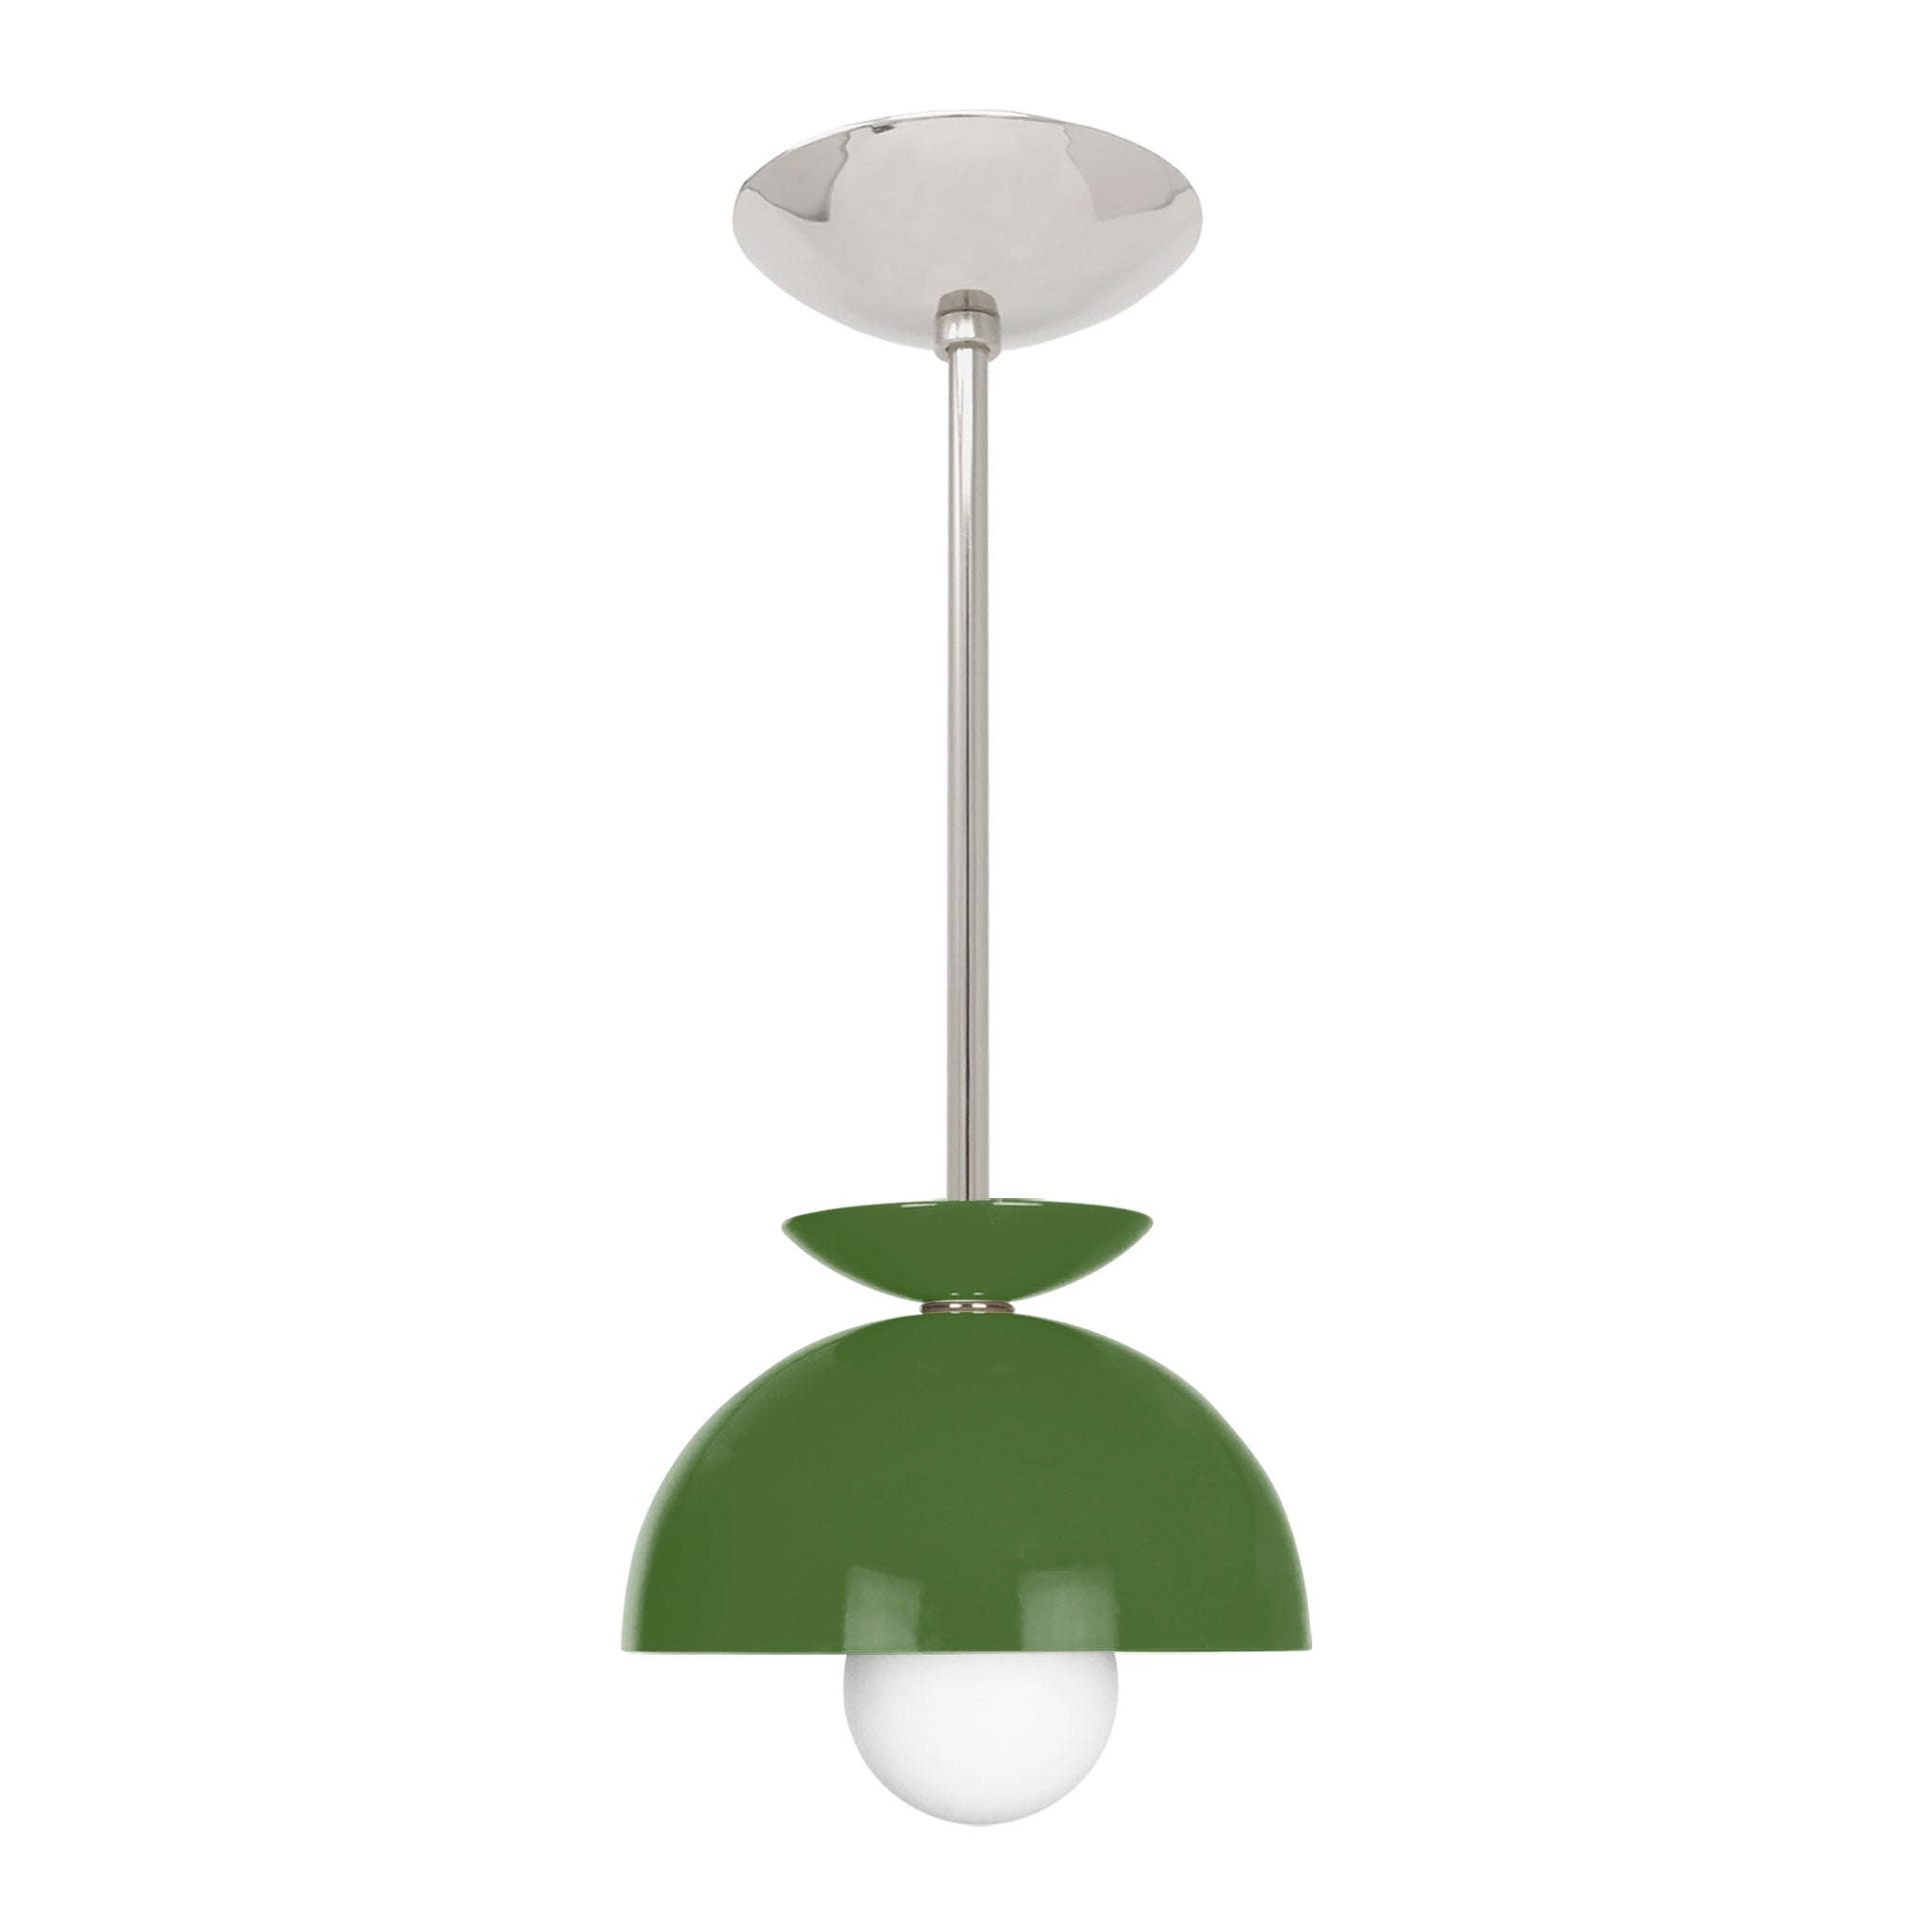 Nickel and python green color Echo pendant 8" Dutton Brown lighting